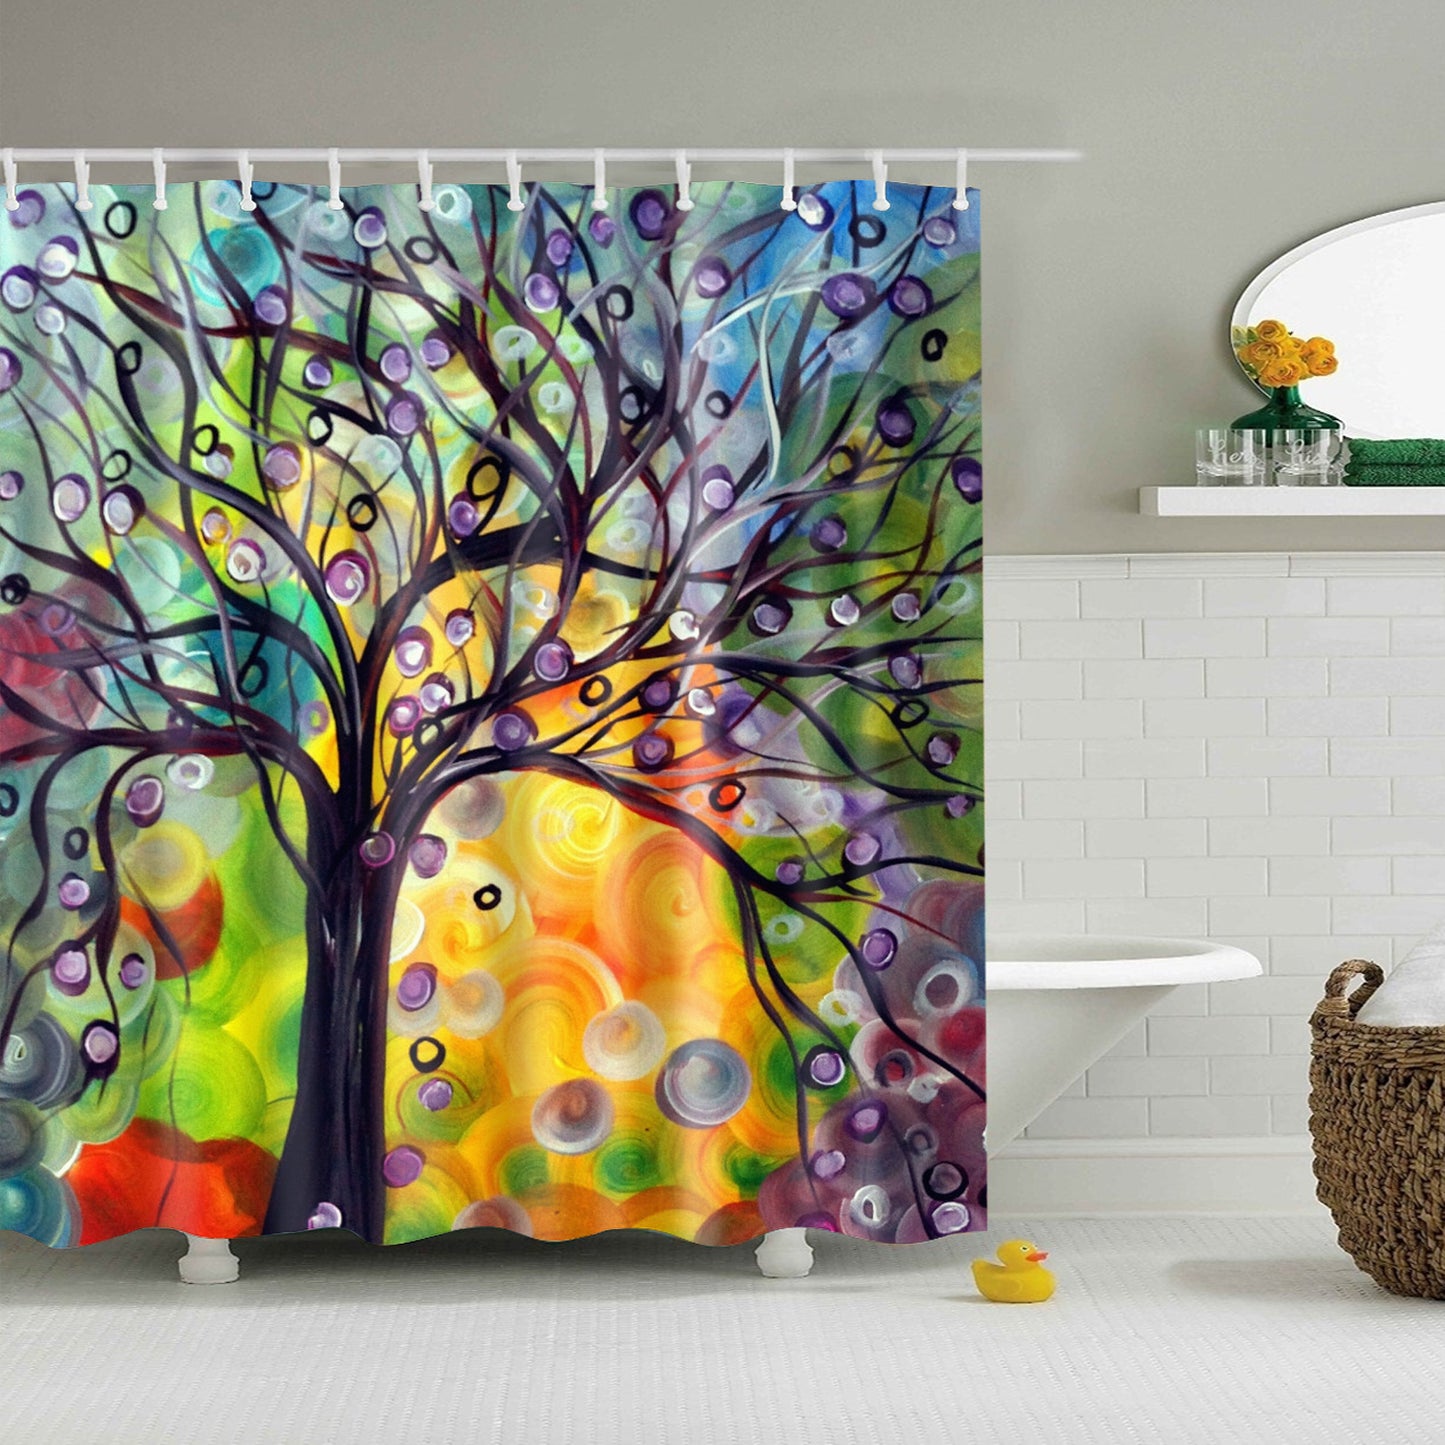 High End Oil Painting Multicolored Tree of Life Shower Curtain